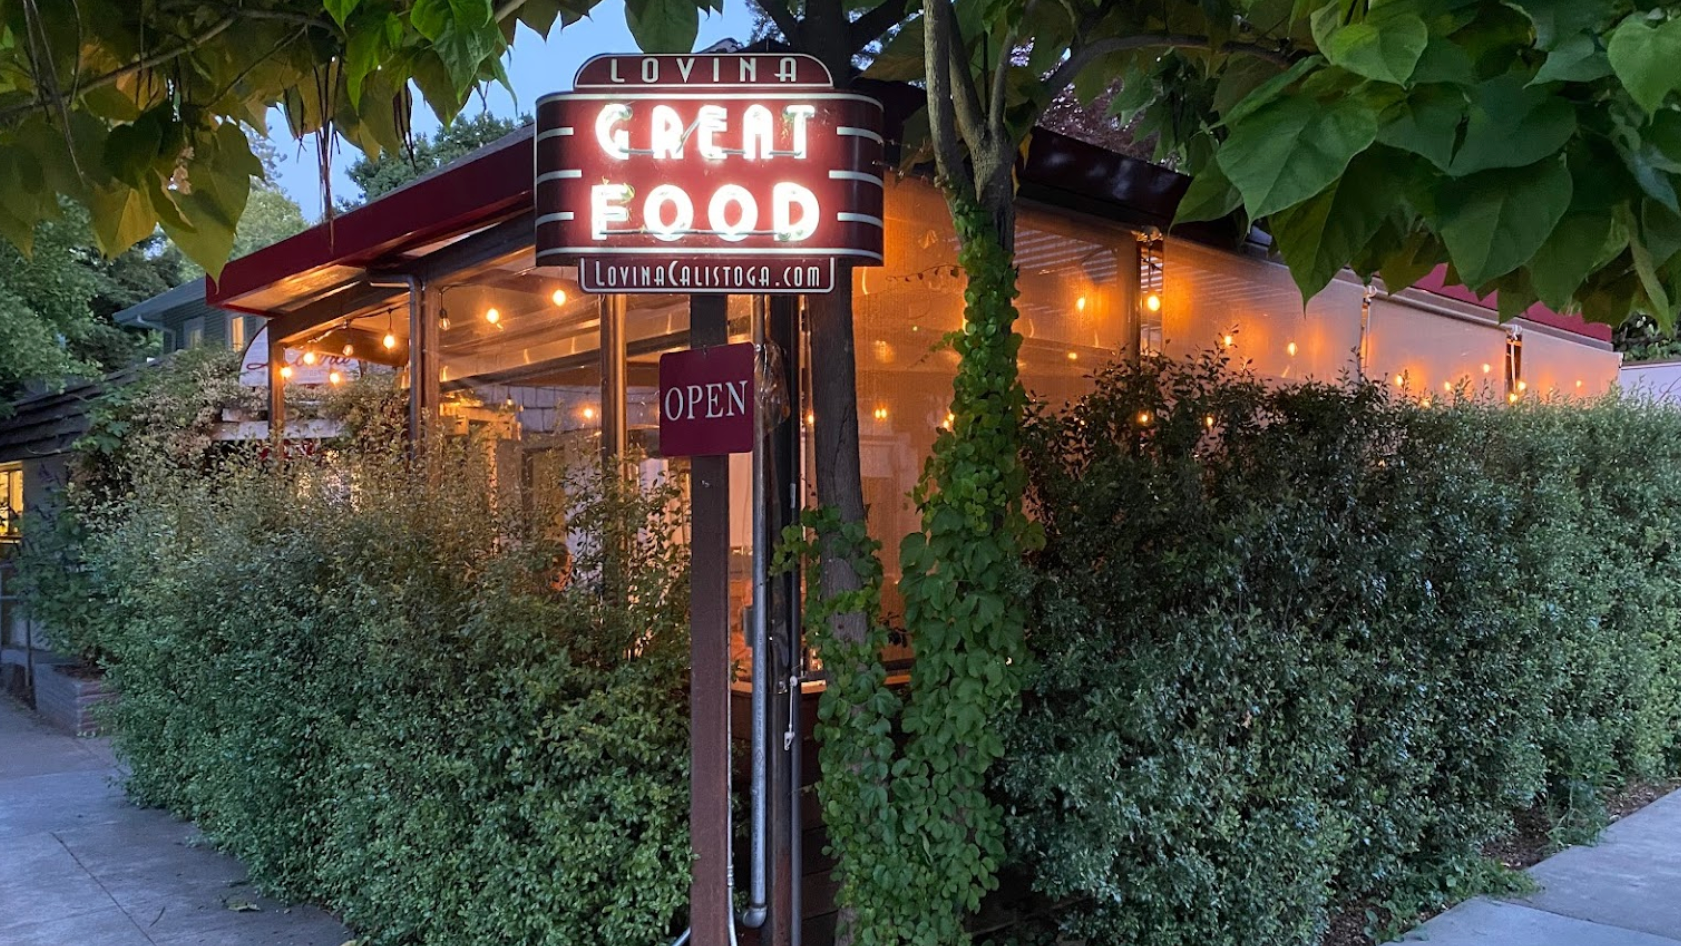 An evening photo of Lovina, a classic American eatery in Calistoga, CA, as featured in Davis Estates’ wine blog on the best things to do in Calistoga